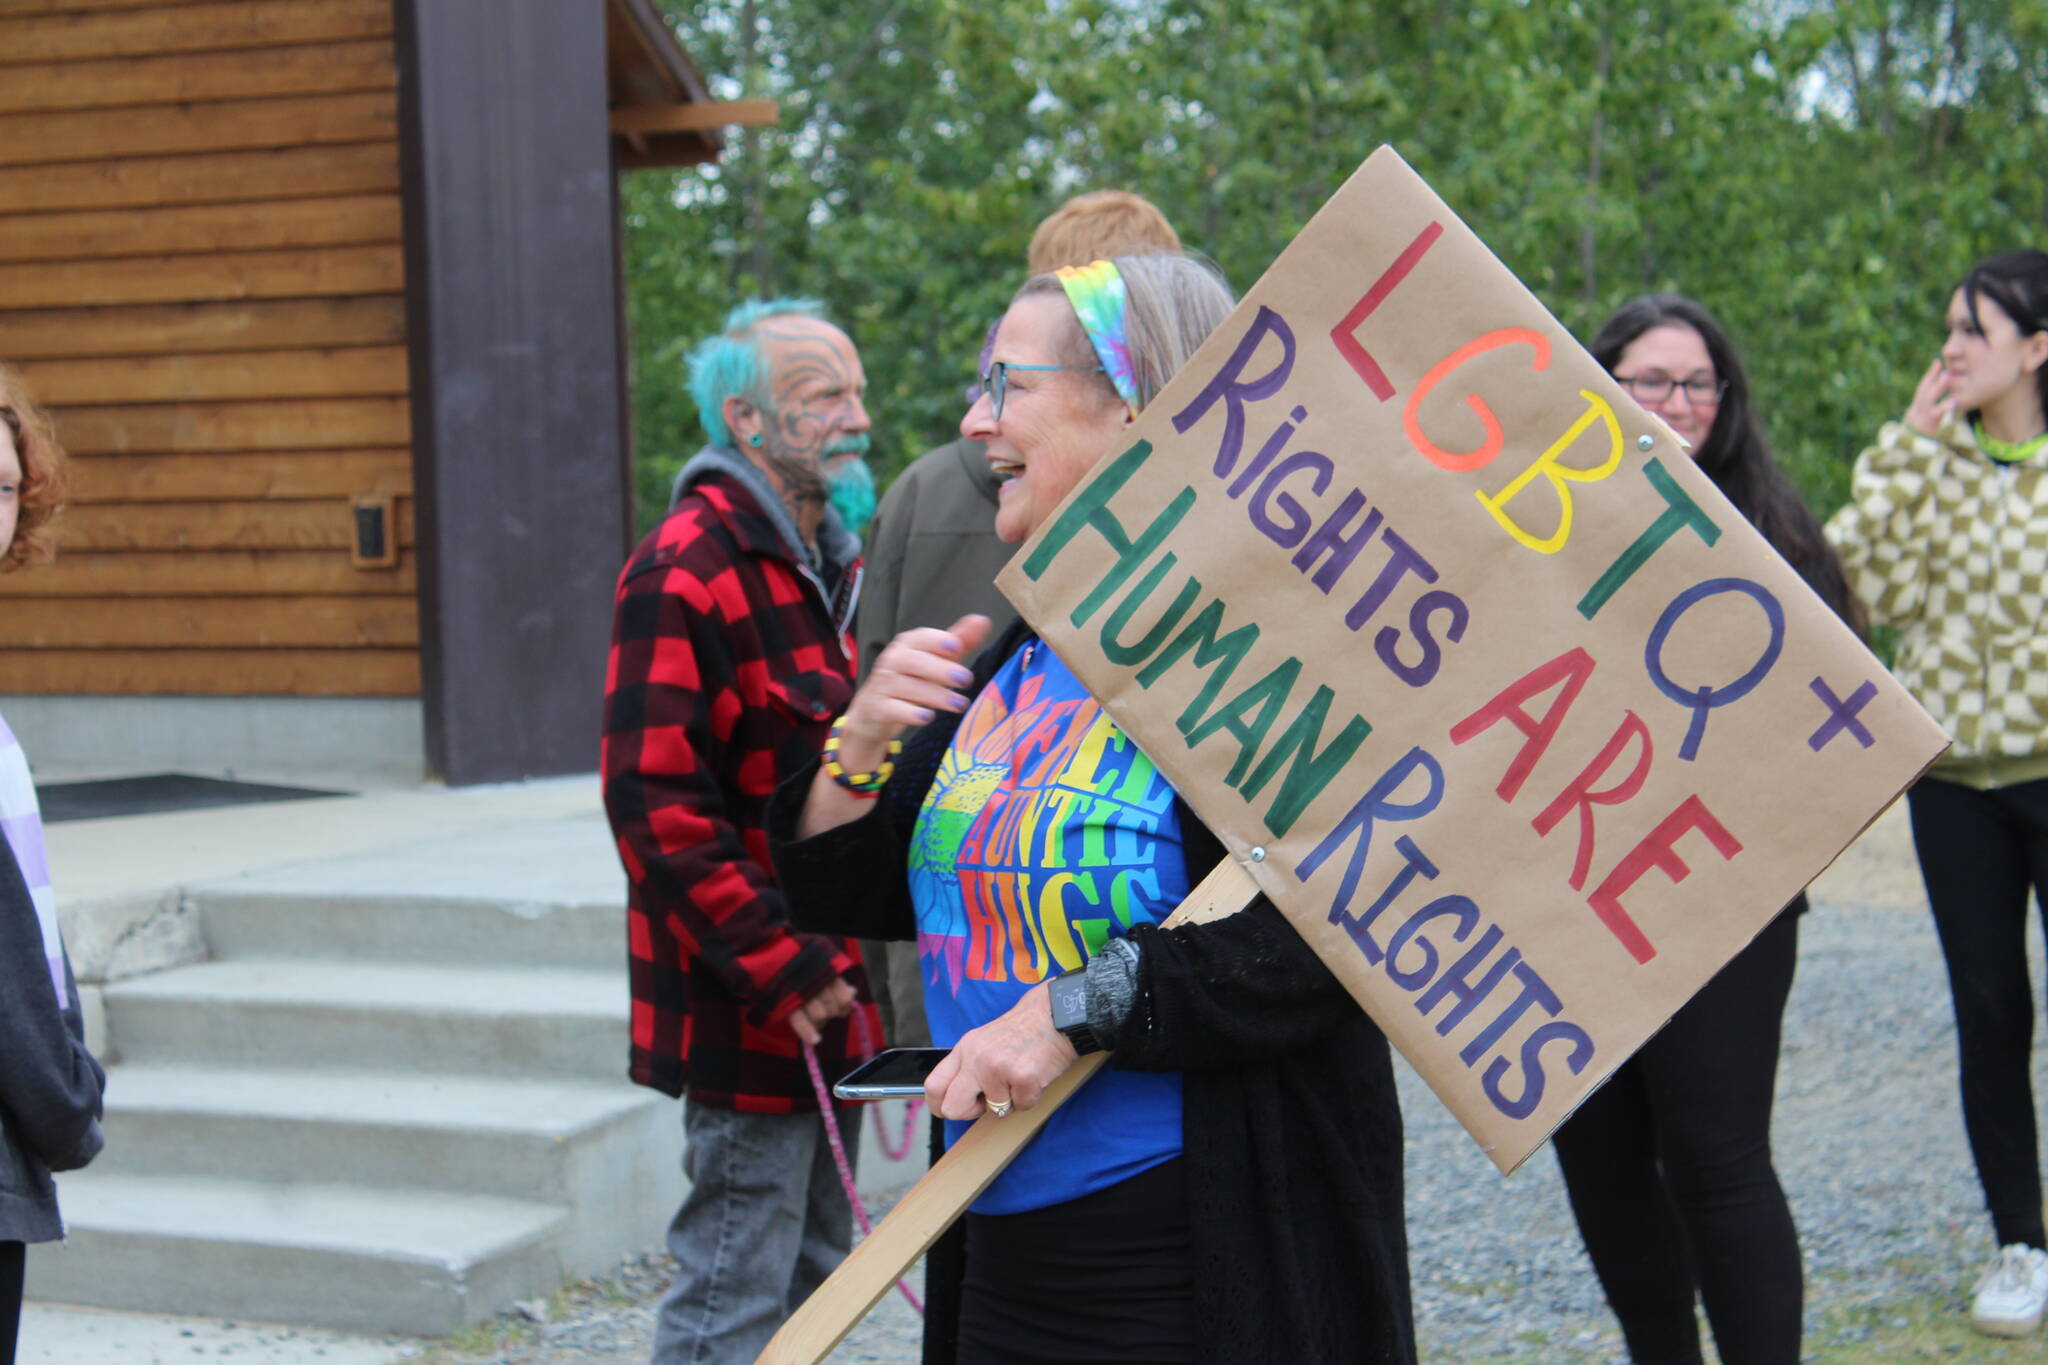 Community members gather in Soldotna on Friday, June 17, 2022 to celebrate Pride month. People marched from the Soldotna Sports Complex to Soldotna Creek Park donned in rainbow-colored attire and wielding flags and signs supporting the LGBTQI+ cause. Waiting at the park were people with different advocacy and resource agencies, as well as entertainment and refreshments. (Camille Botello/Peninsula Clarion)